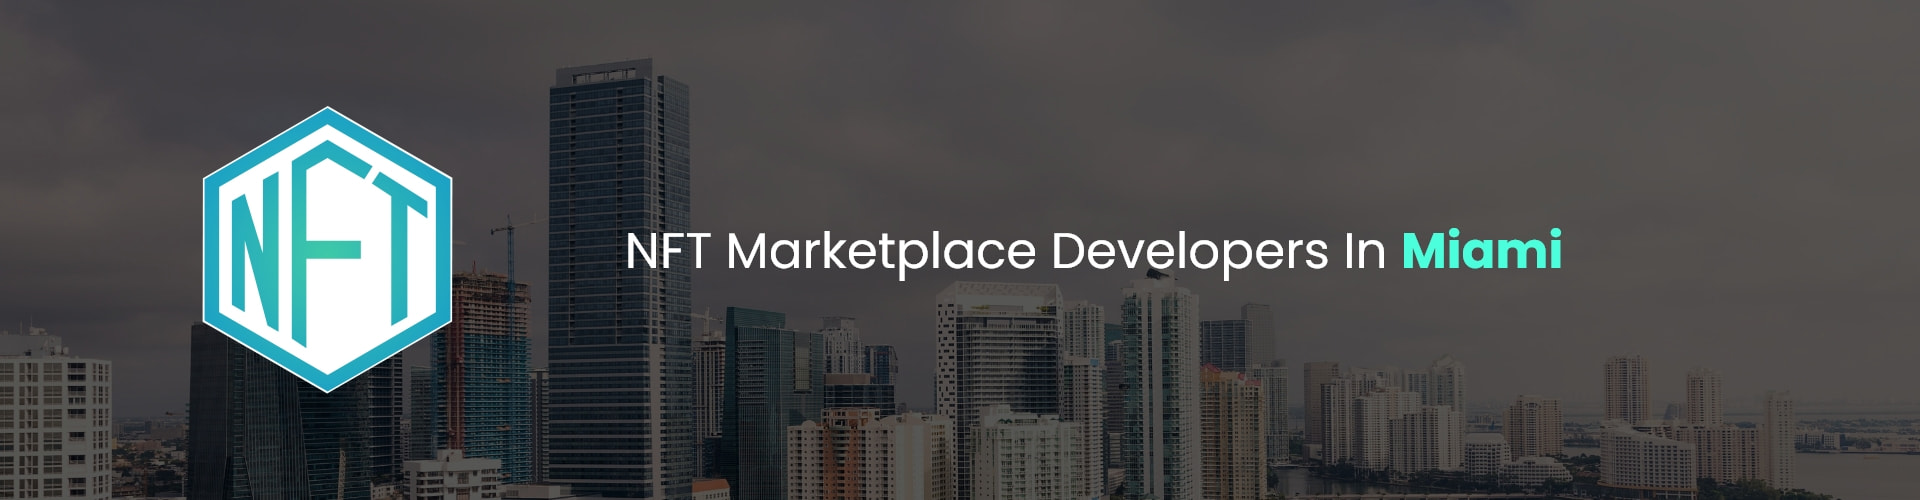 hire nft marketplace developers in miami